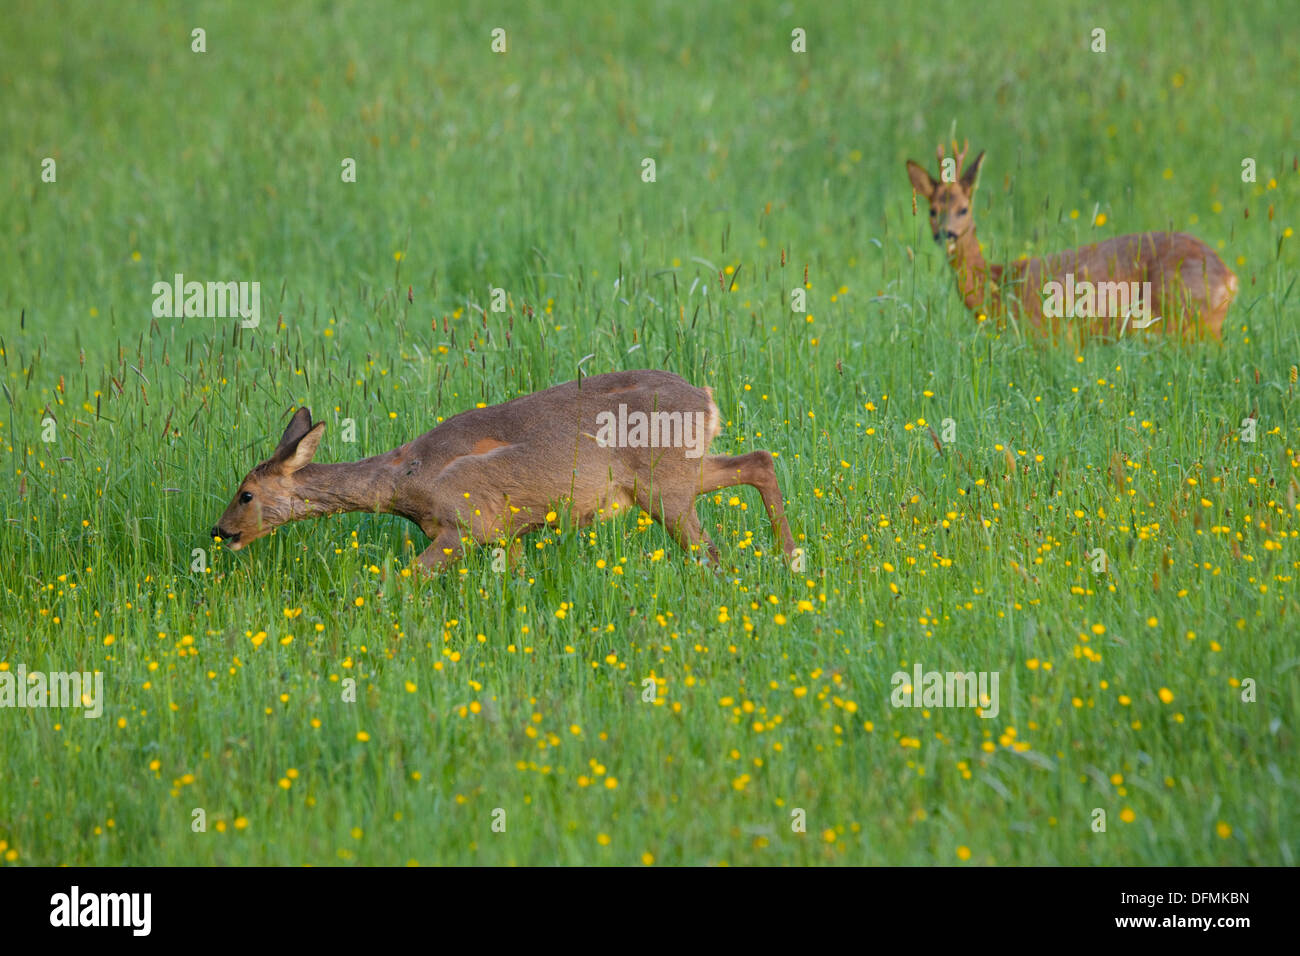 Roe Deer (Capreolus capreolus) molting in spring, losing it's winter coat. Feeding in a field with buttercup flowers. Spring. Stock Photo